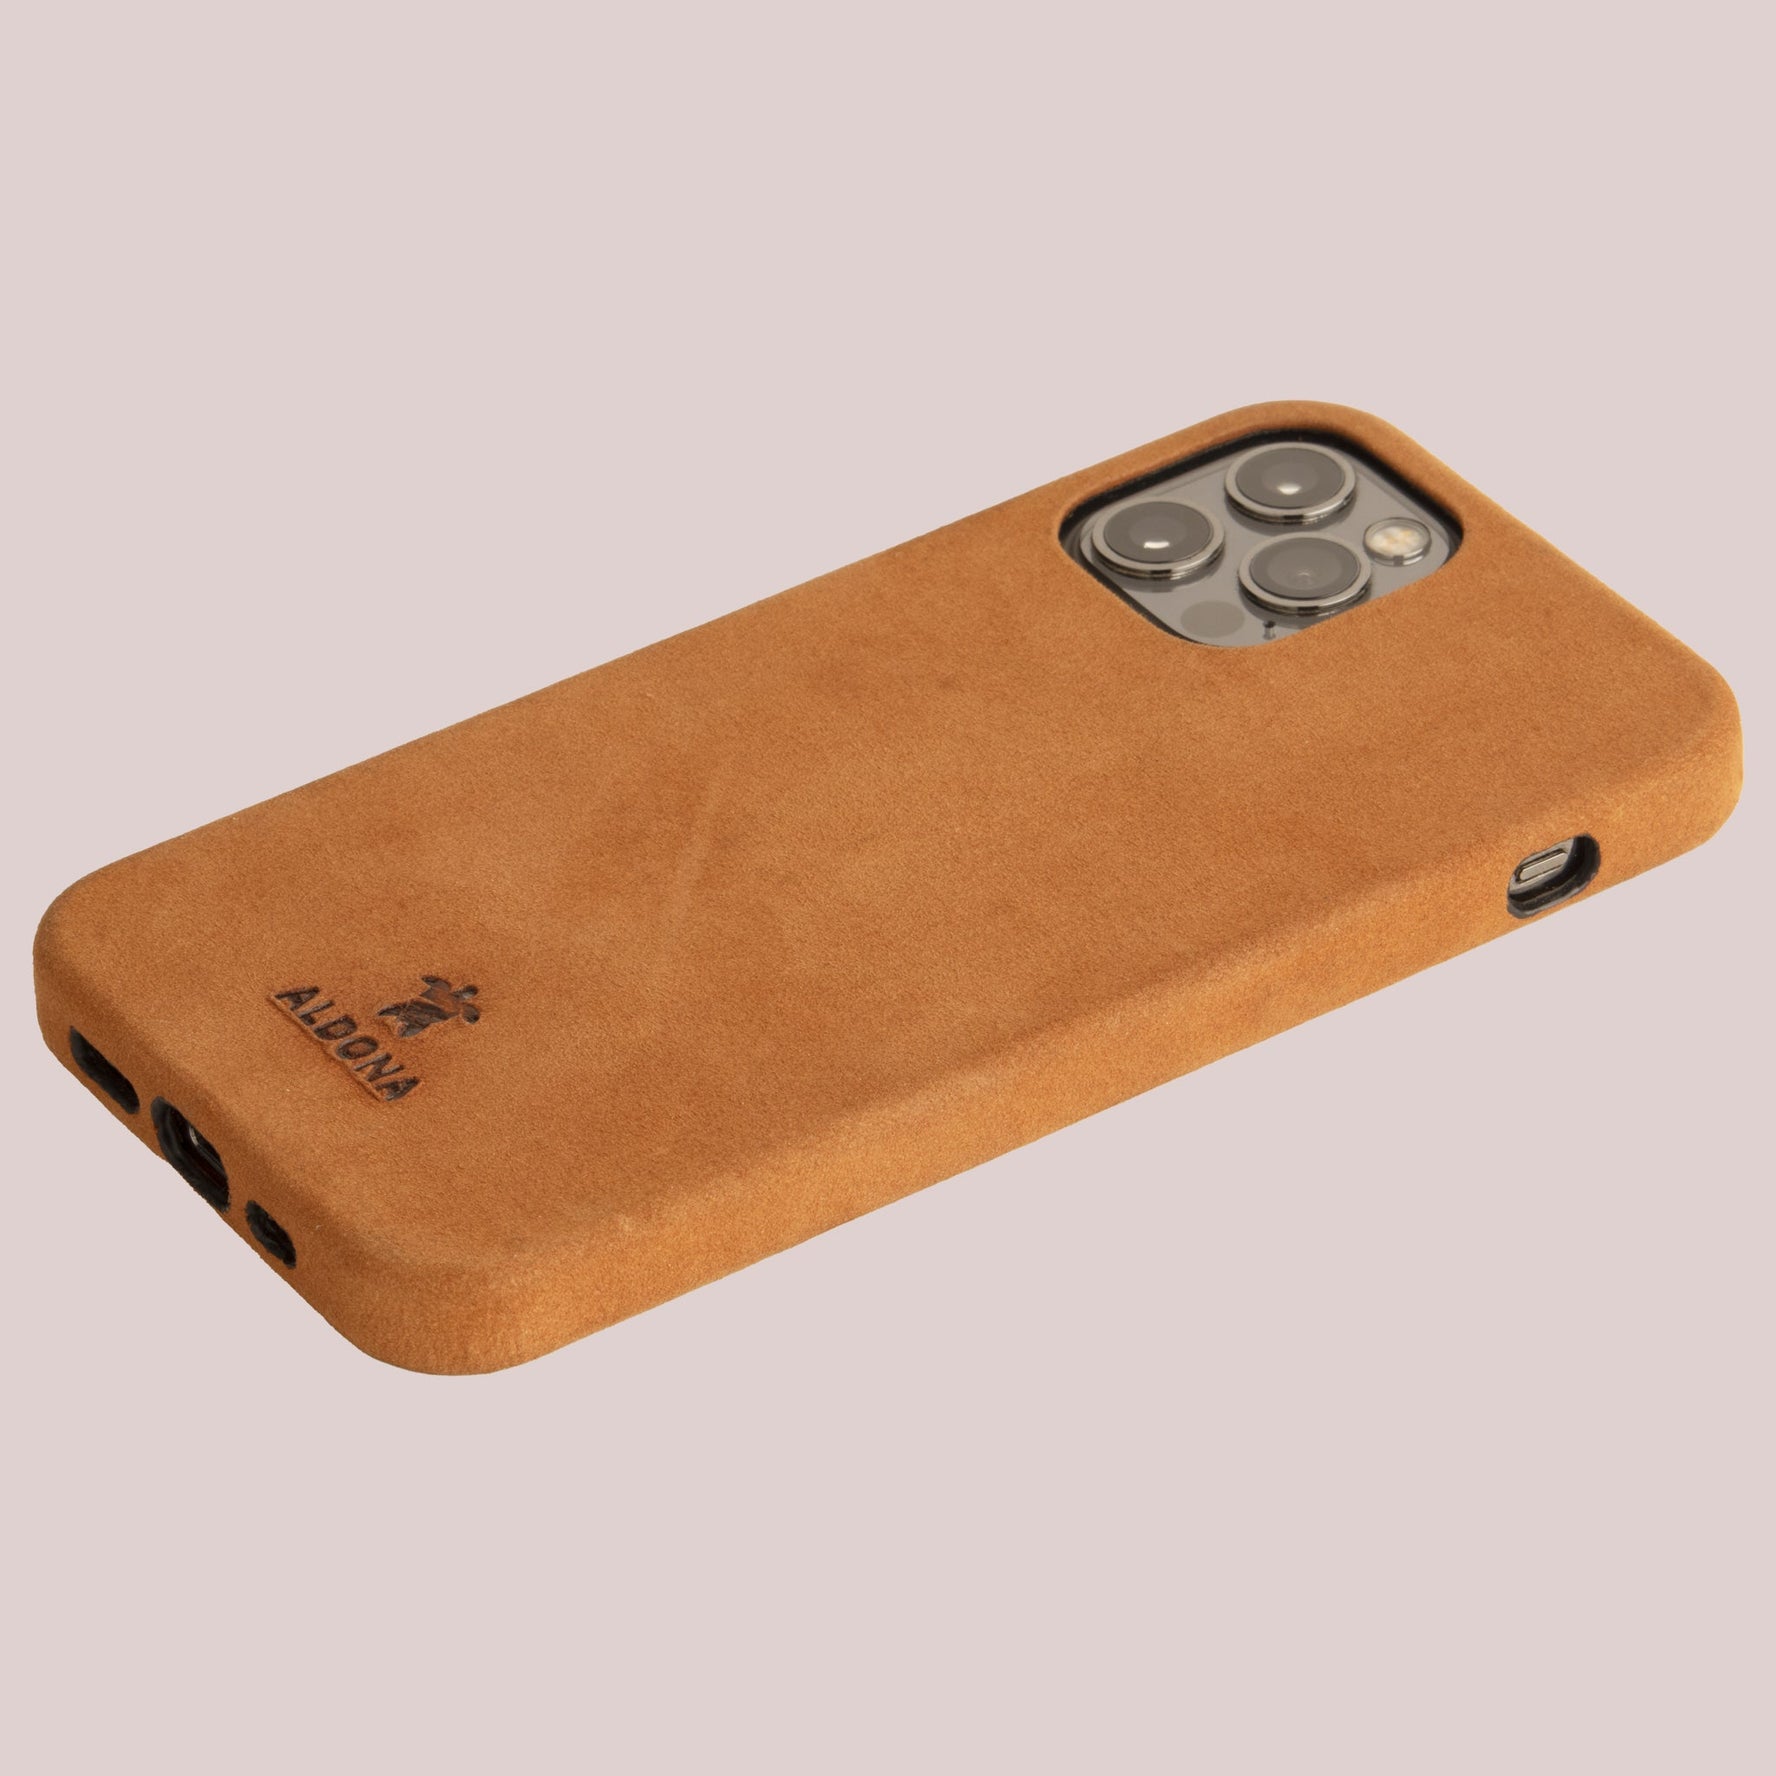 Kalon Case for iPhone 13 series with MagSafe Compatibility - Dark Soil